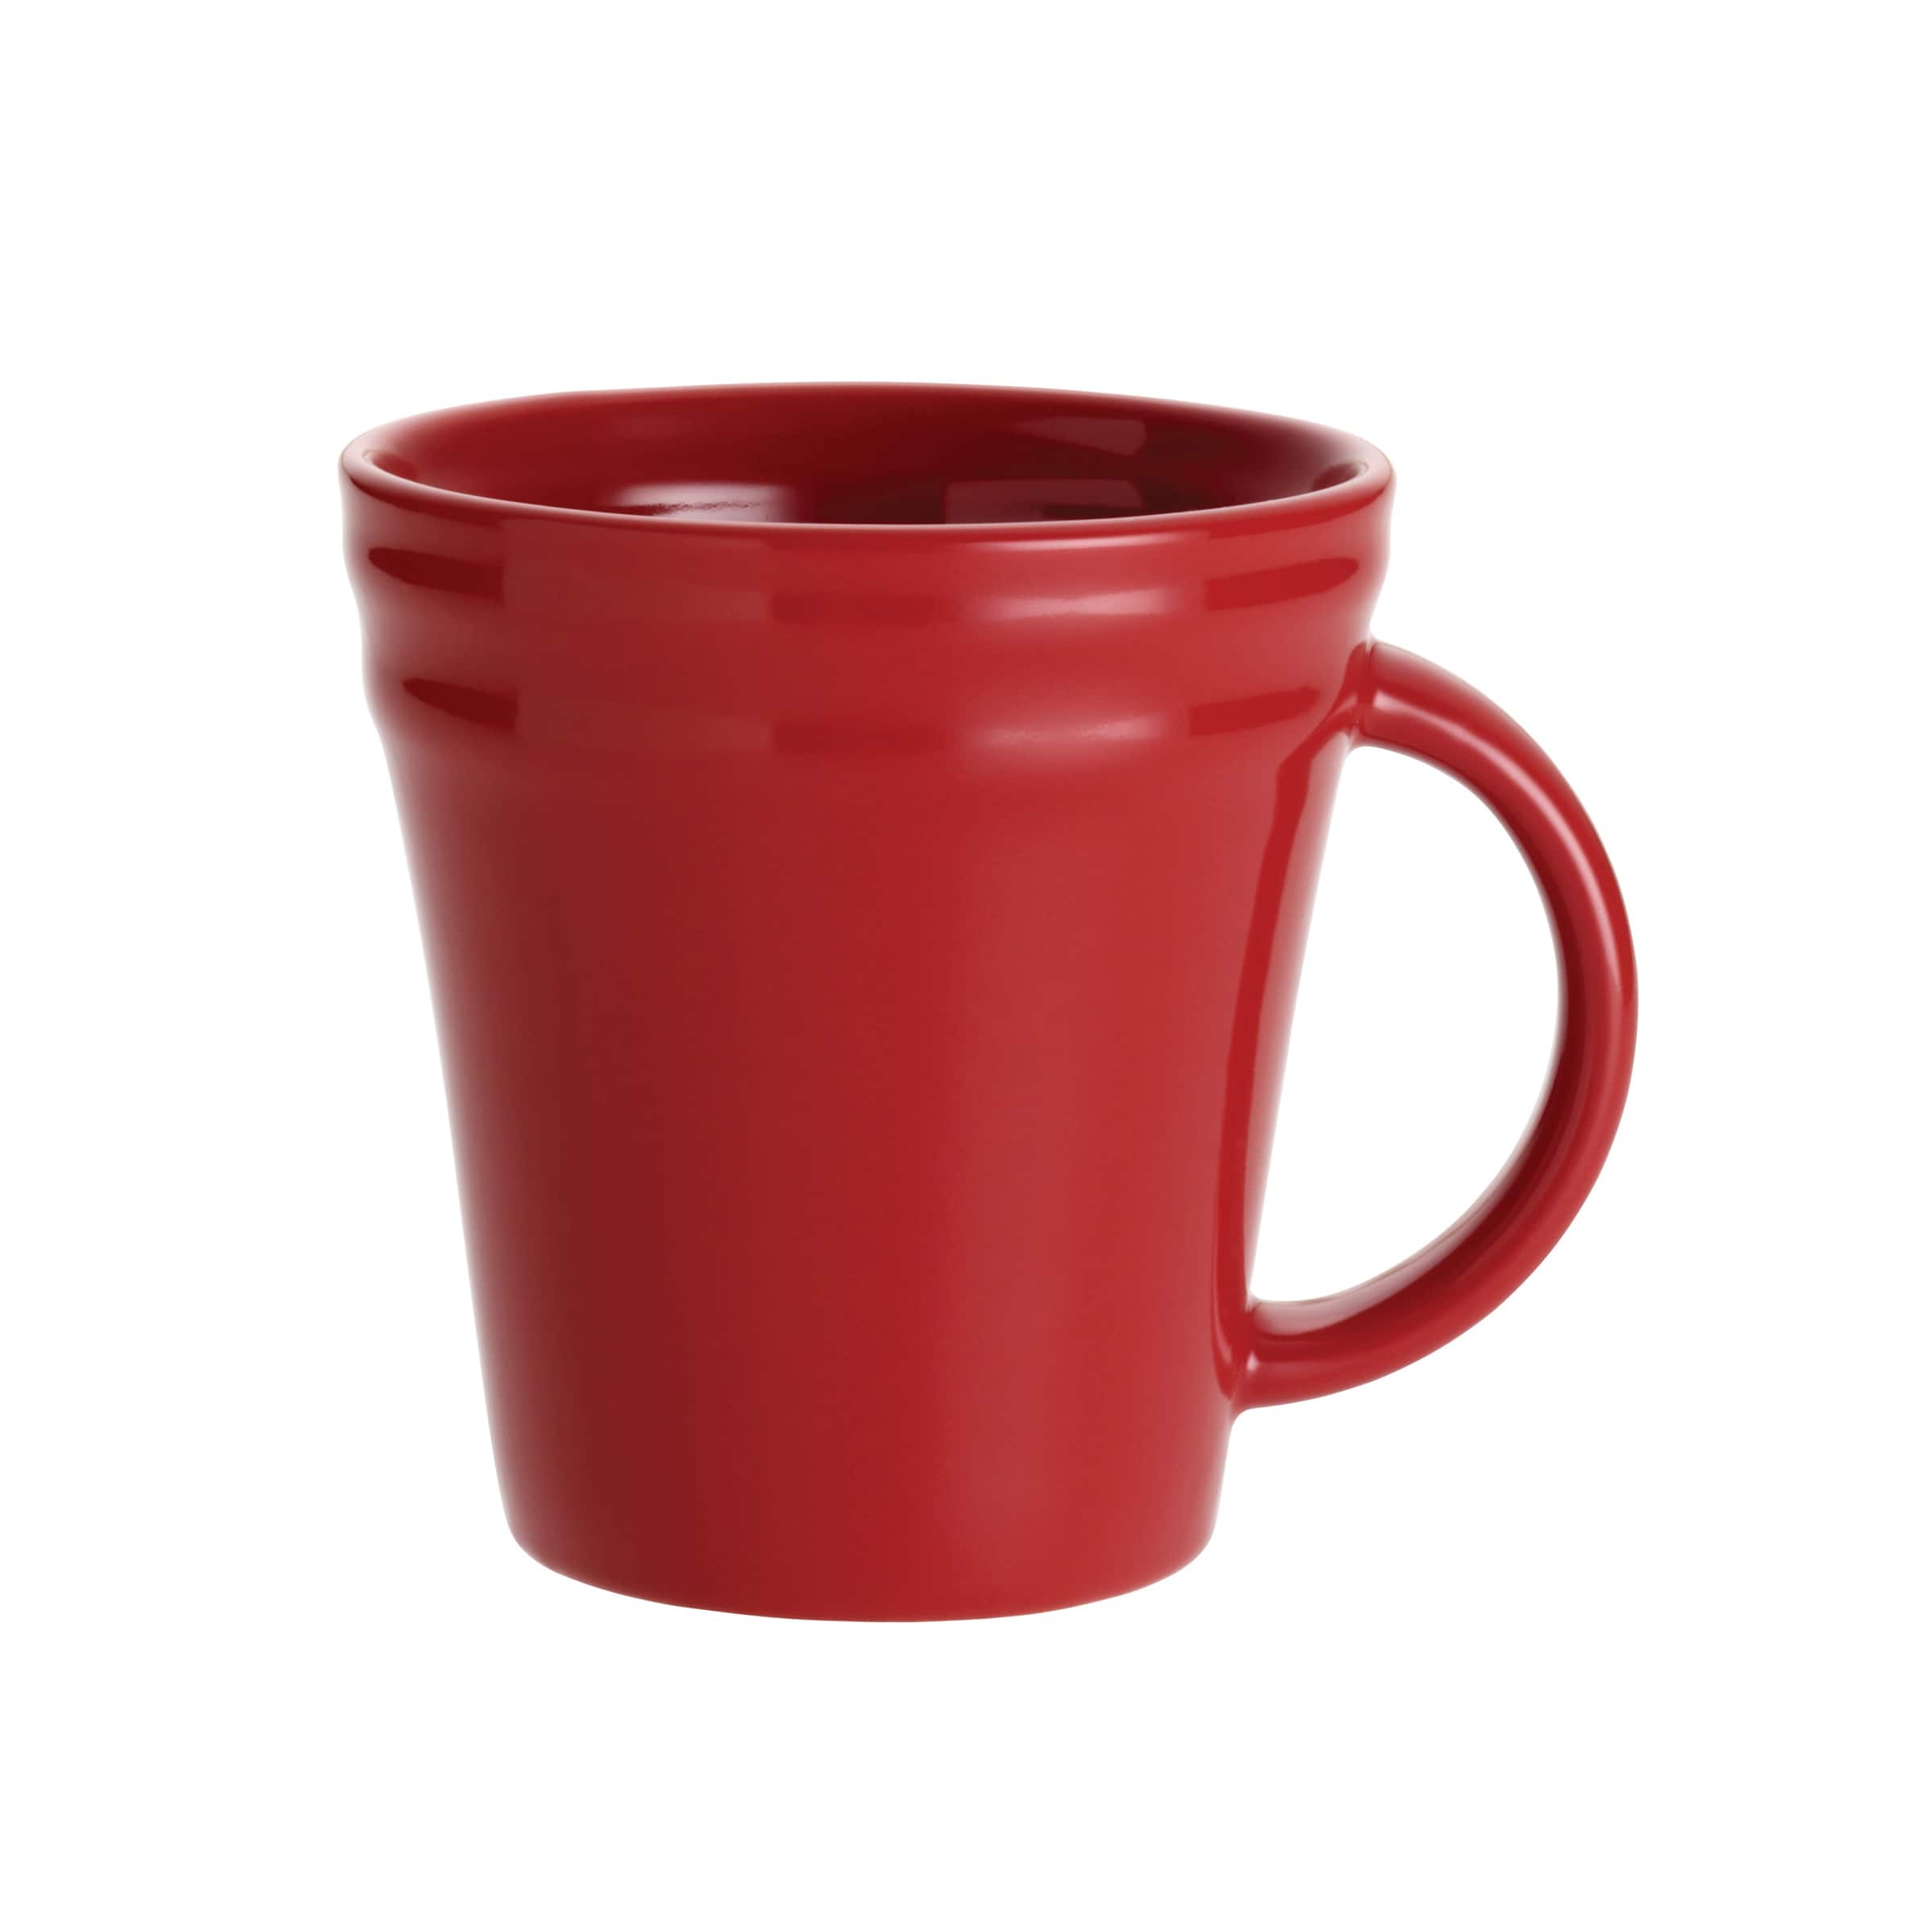 https://ak1.ostkcdn.com/images/products/7468932/Rachael-Ray-Double-Ridge-12-ounce-Red-Mugs-Set-of-4-3adedf78-9d89-4194-aee7-a07023623619.jpg